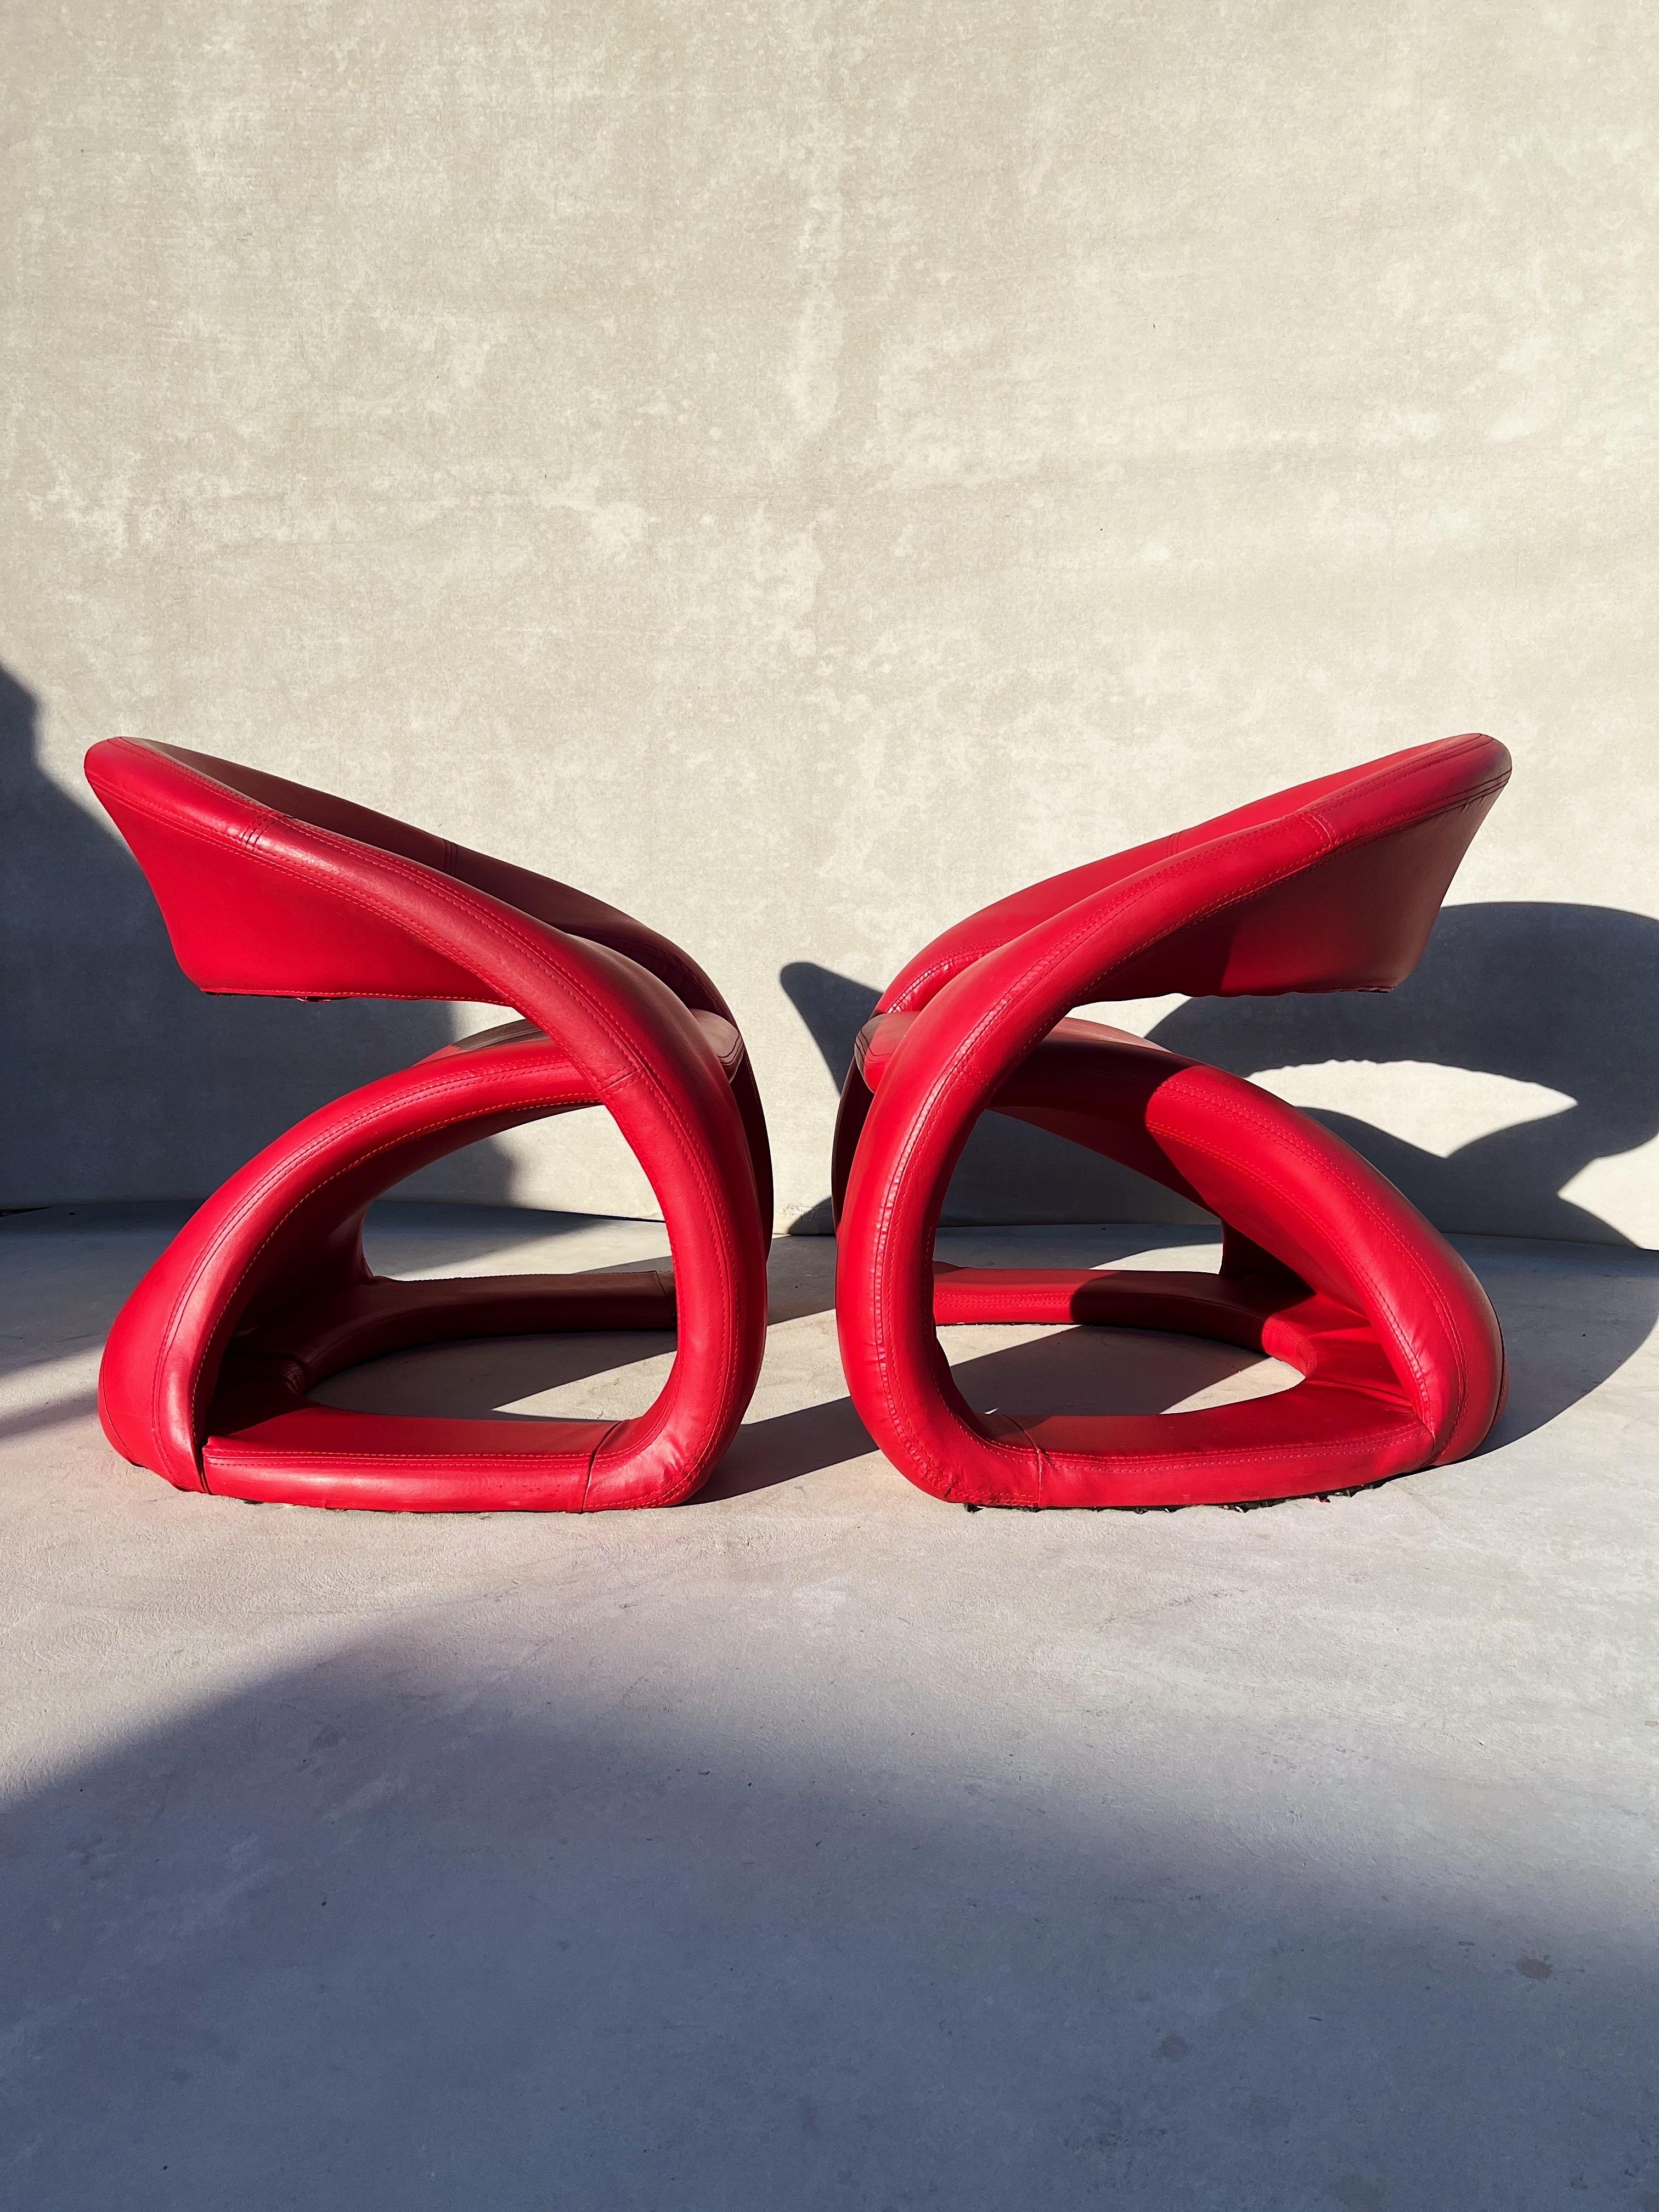 Vintage Pair of Sculptural Chairs in Electric Red, Attributed to Jaymar 1